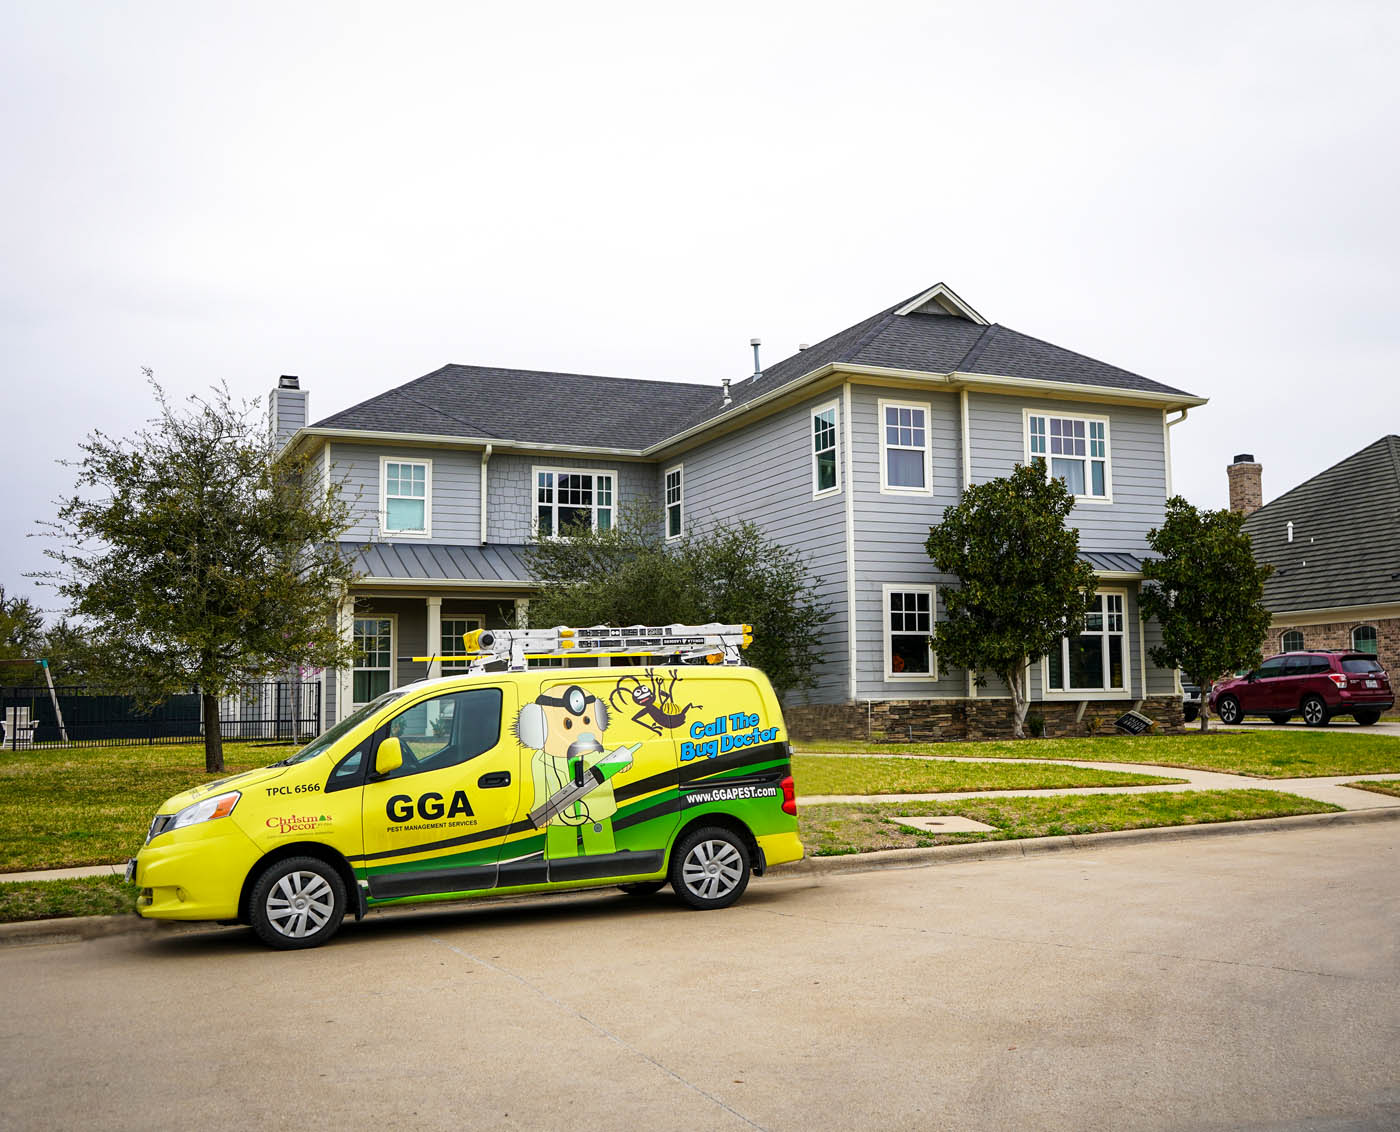 A GGA Pest Management vehicle in front of a residential home - learn how we can help with our roach exterminator services in Hillsboro, TX.